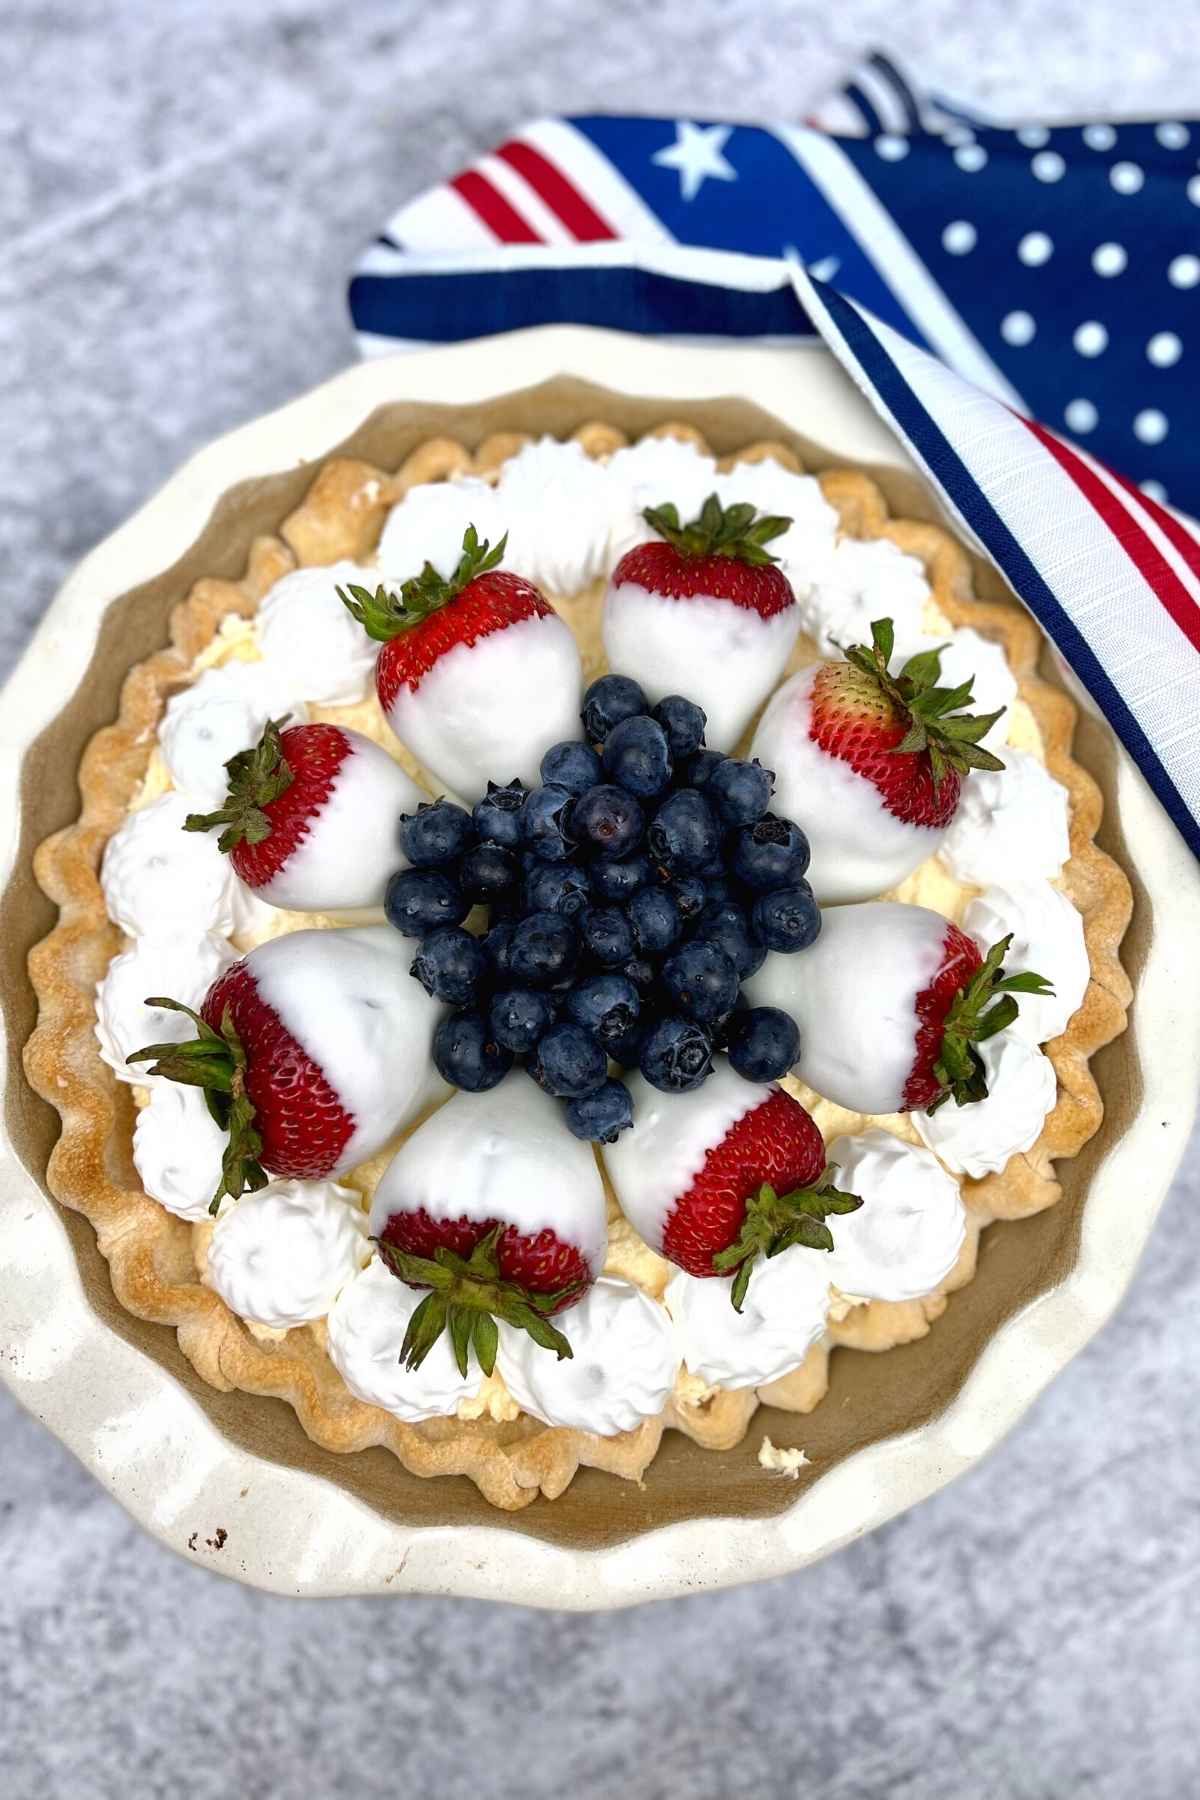 Overhead image of red white and blueberry pie decorated with white chocolate coated strawberries.